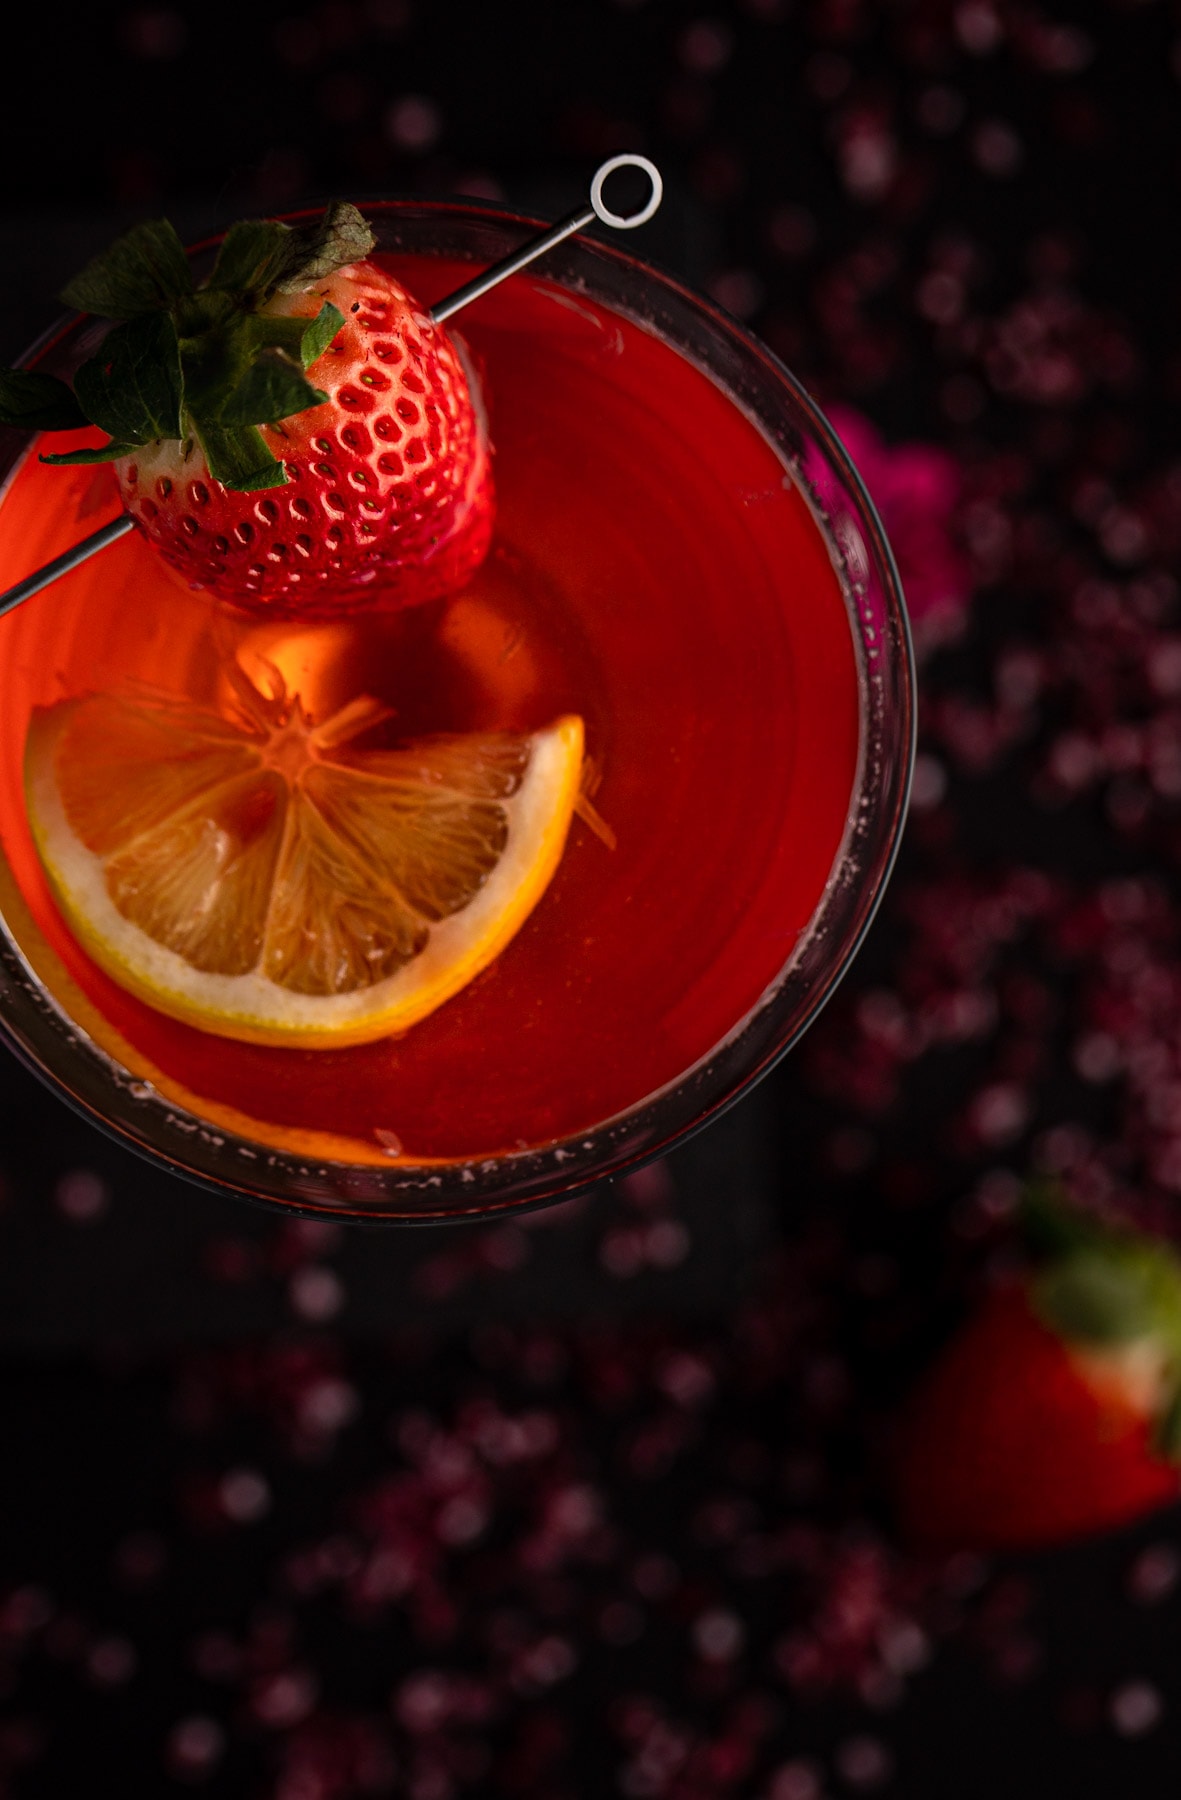 Overhead view of martini garnished with a strawberry and a slice of lemon.